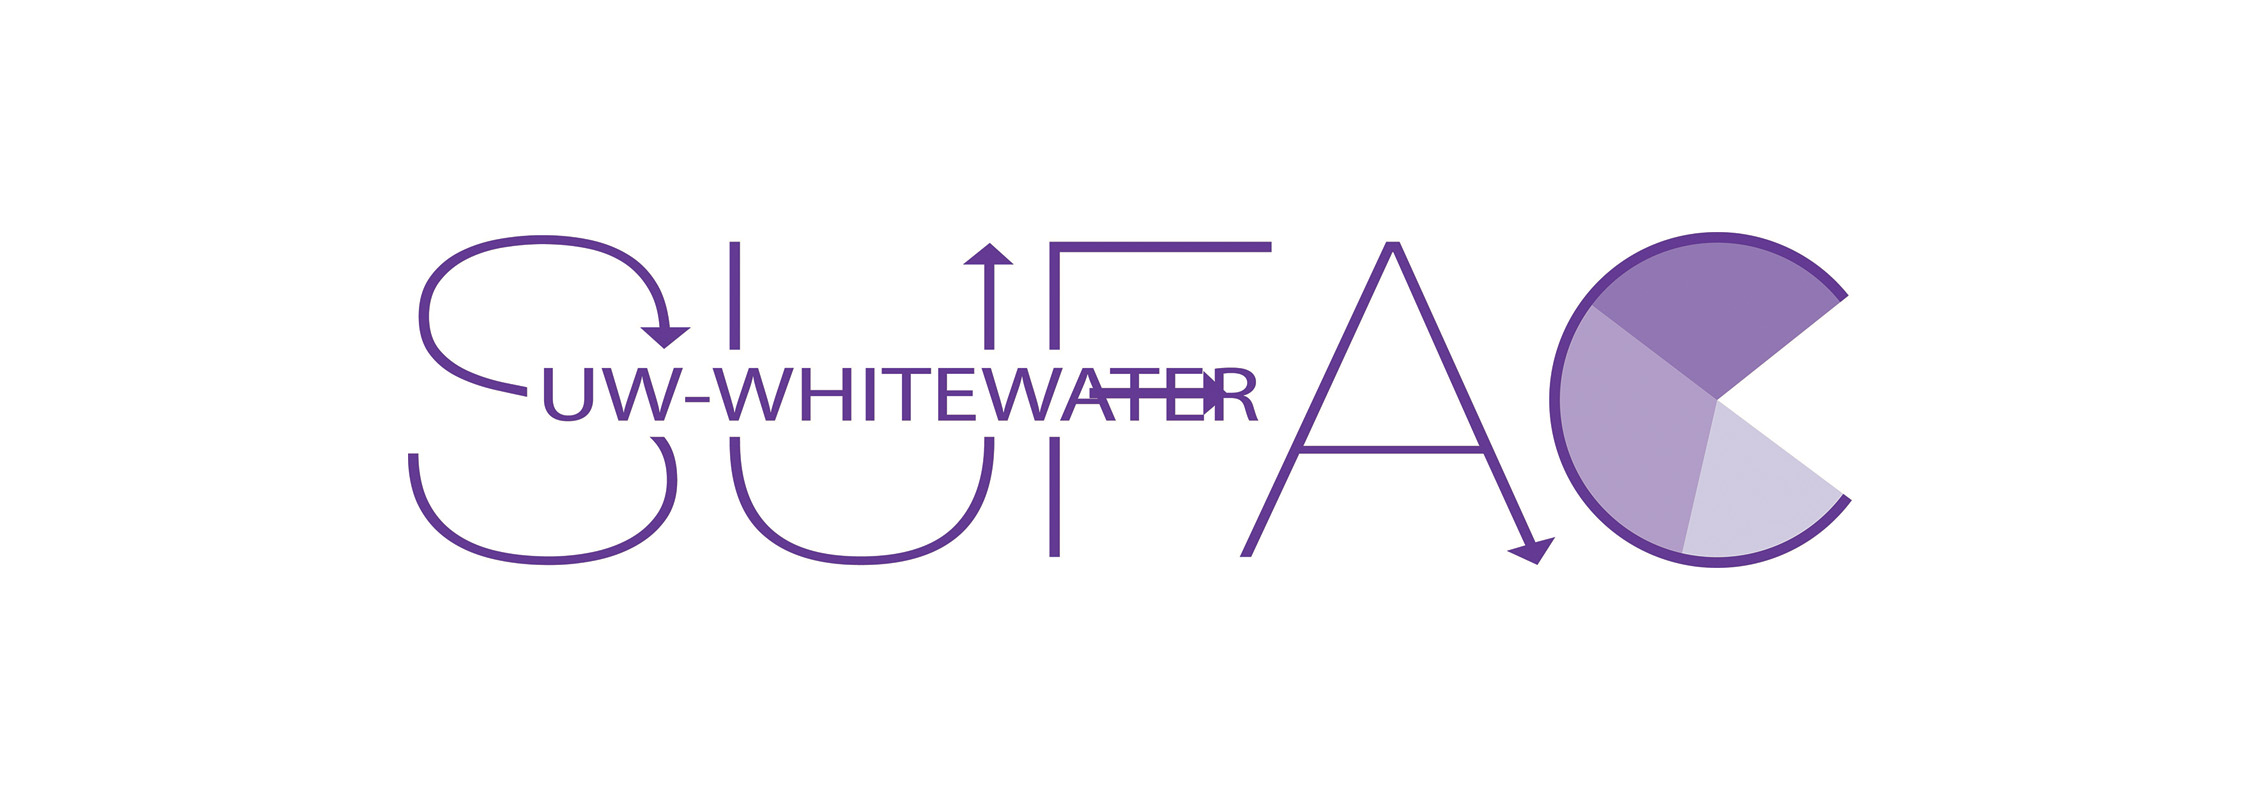 Sufac logo at UW-Whitewater